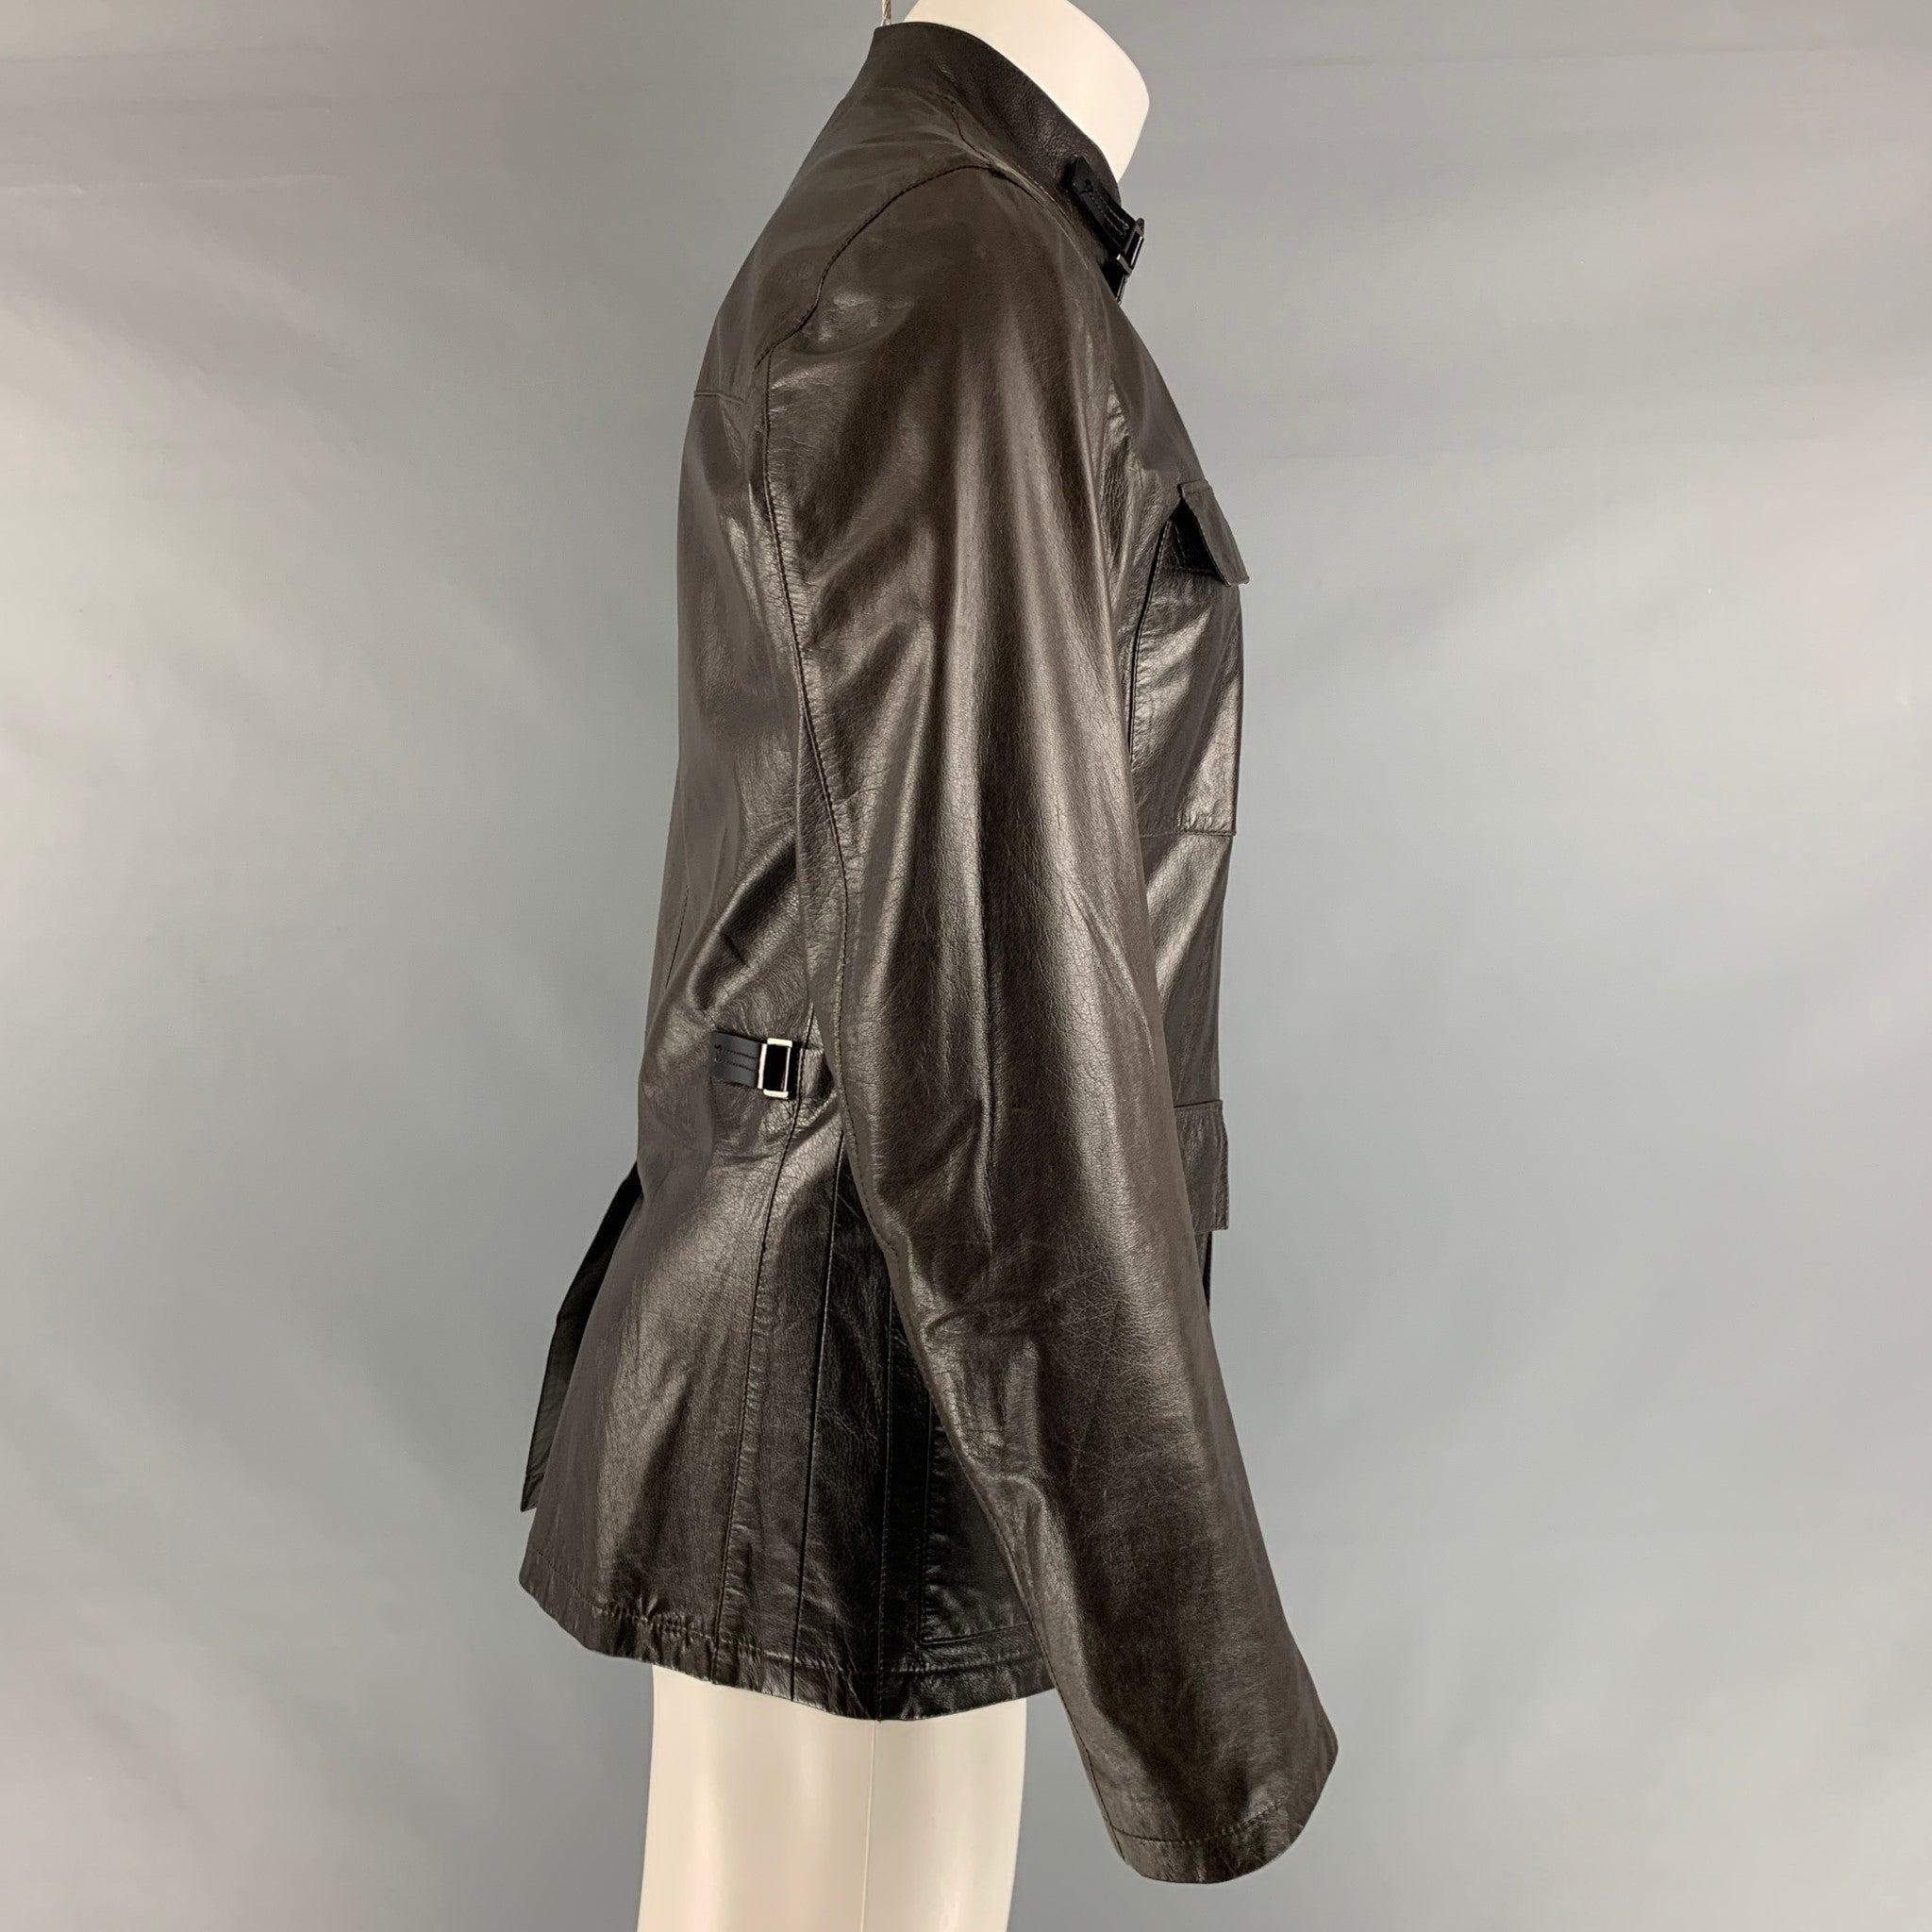 PRADA jacket comes in a brown leather featuring a stand up collar, front pockets, and a zip up closure. Made in Italy.Excellent Pre-Owned Condition. 

Marked:   48 

Measurements: 
 
Shoulder: 18 inches Chest: 43 inches Sleeve: 26 inches Length: 30